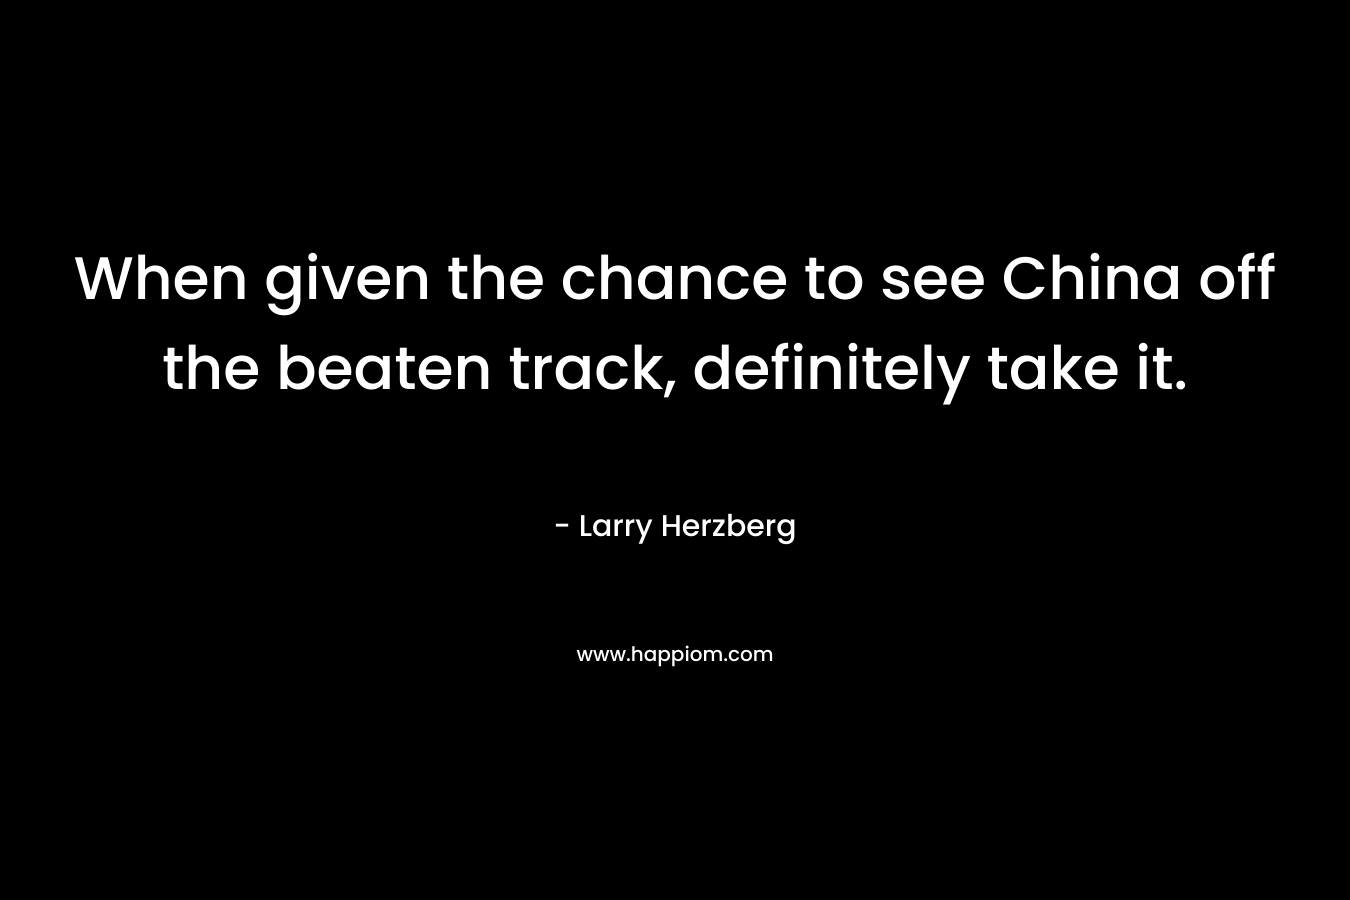 When given the chance to see China off the beaten track, definitely take it. – Larry Herzberg